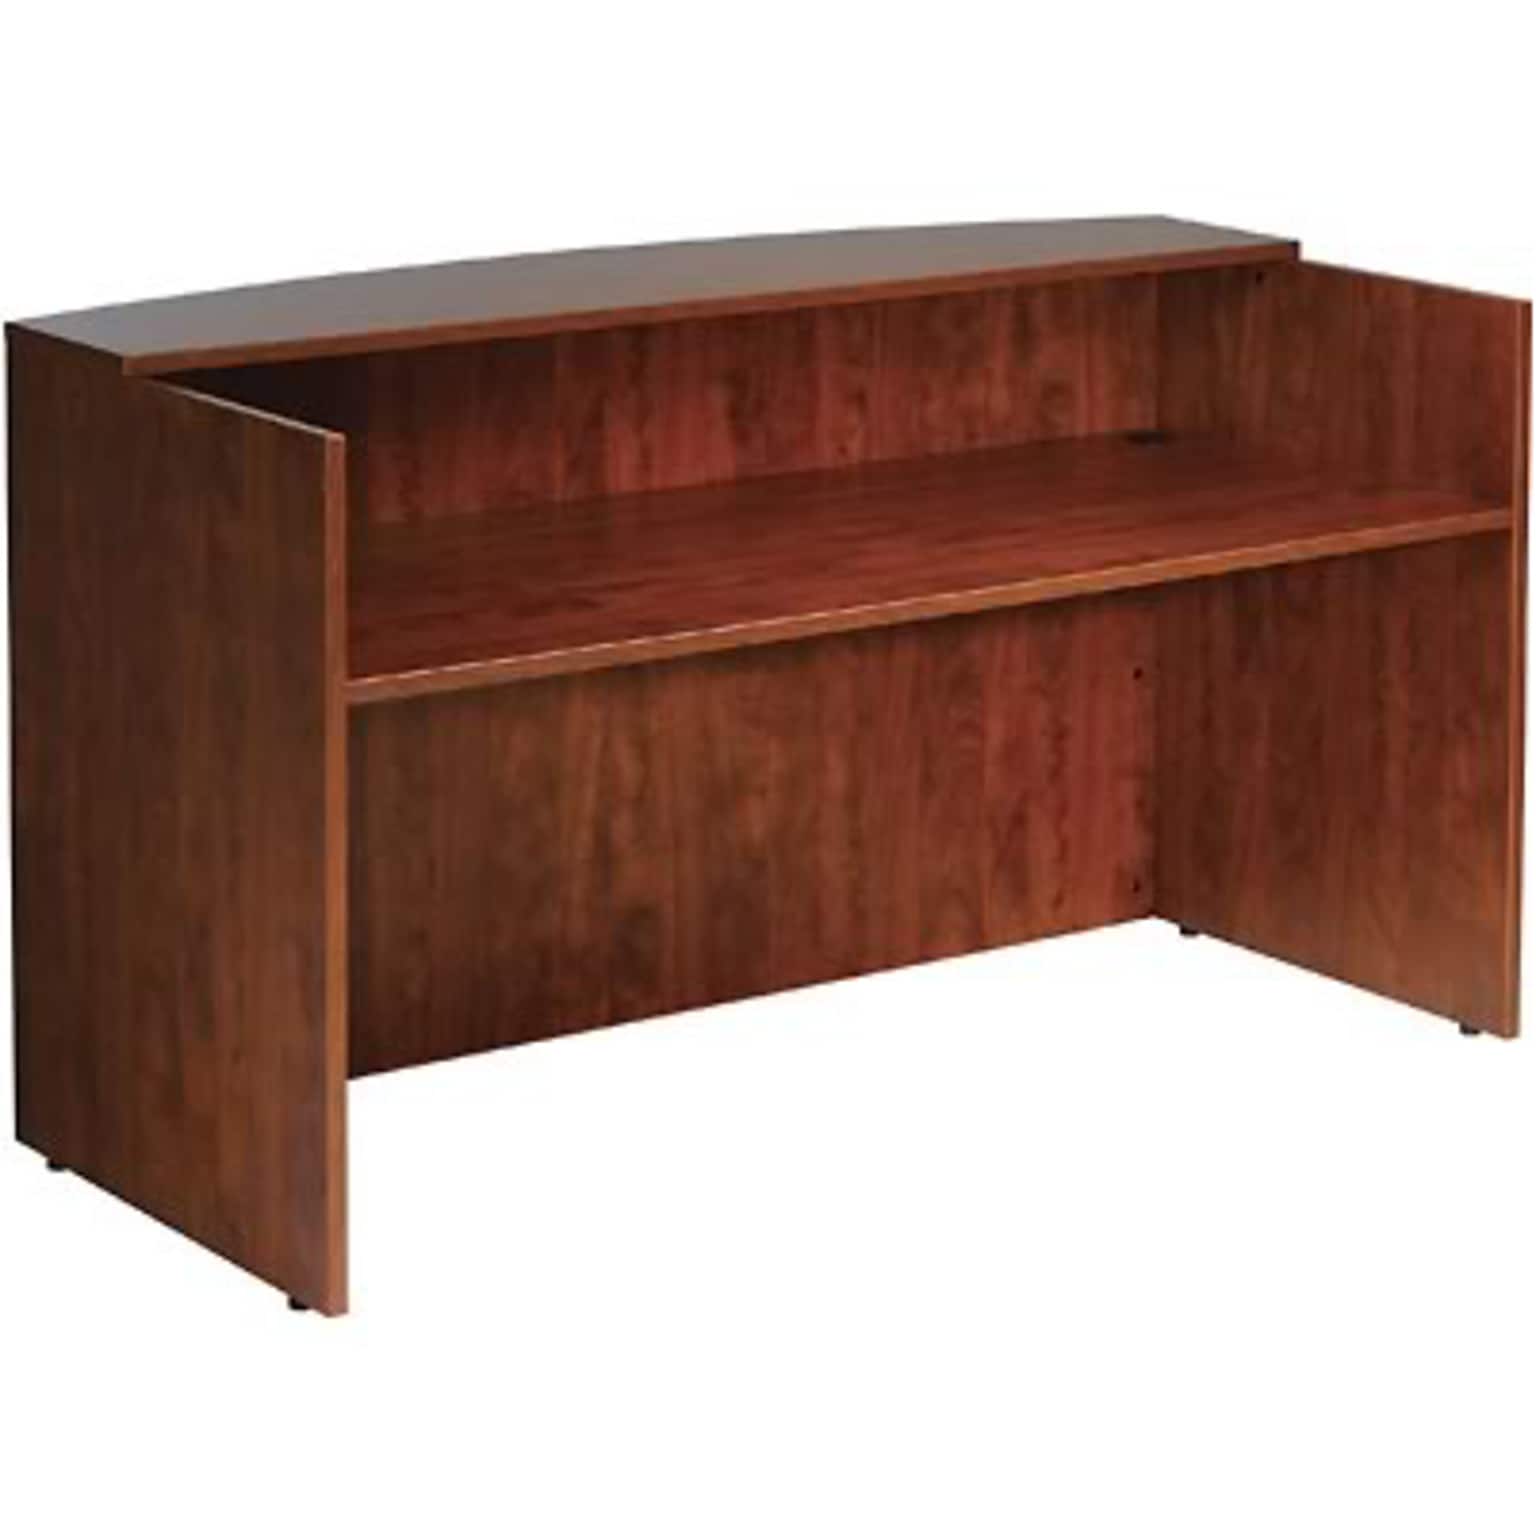 Boss® Laminate Collection in Cherry Finish; Reception Desk Shell